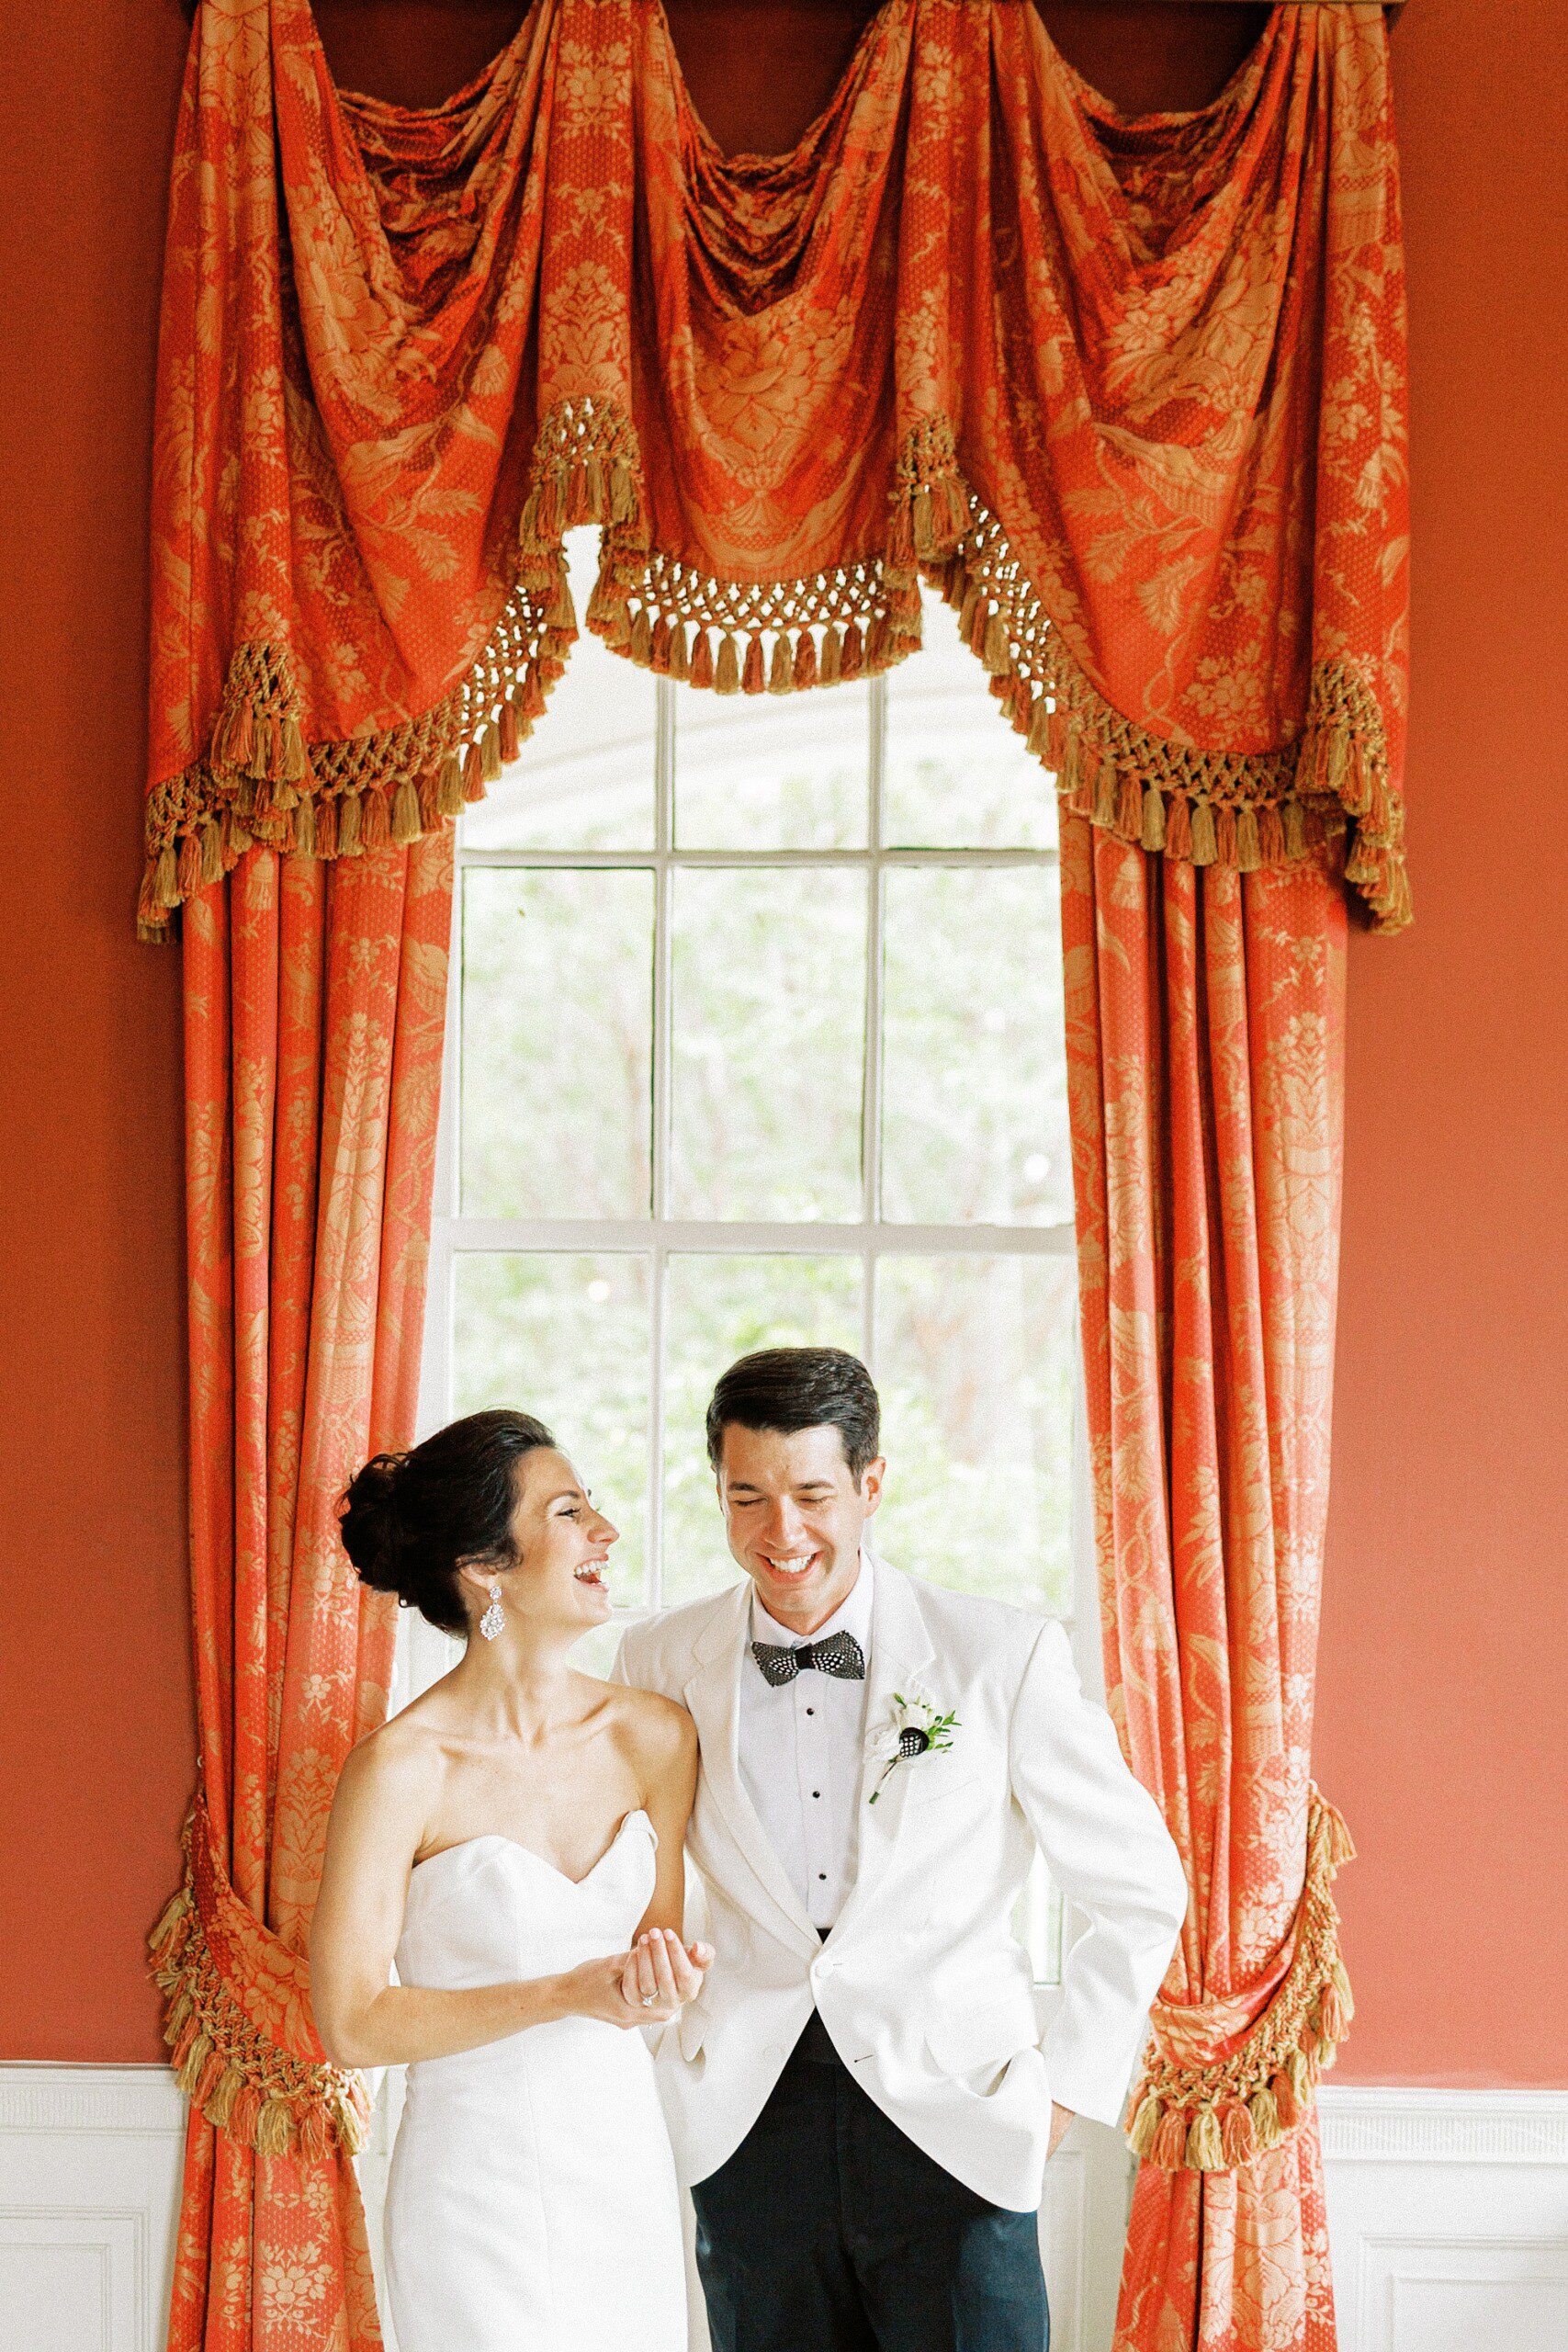 A bride and groom laughing in the red room at the William Aiken House